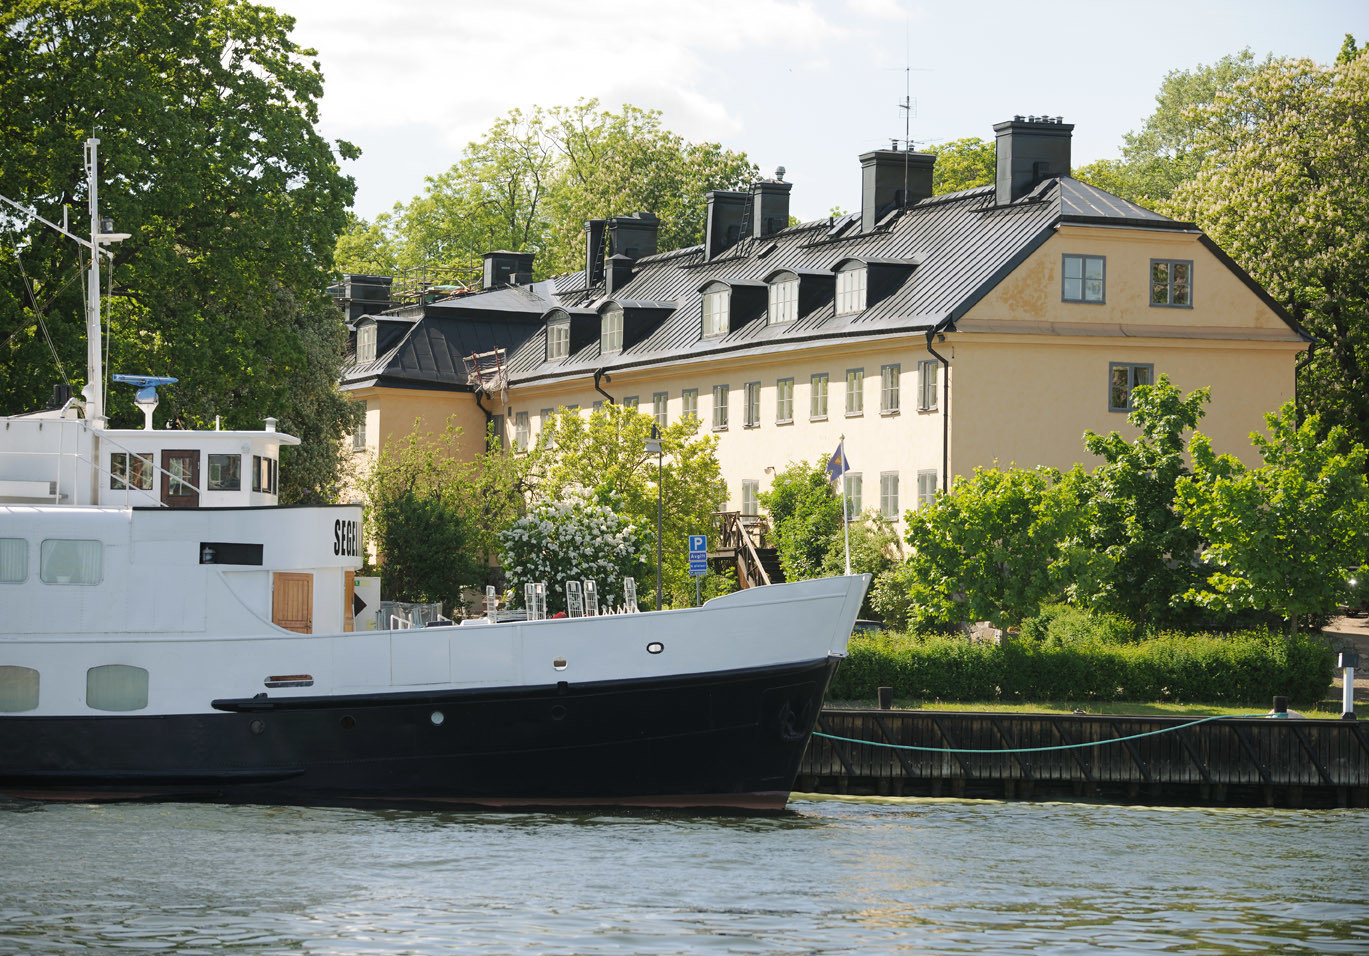 Hotels Stockholm Sweden water tree outdoor Boat waterway water transportation watercraft motor ship ship vehicle tugboat house channel Canal River bayou